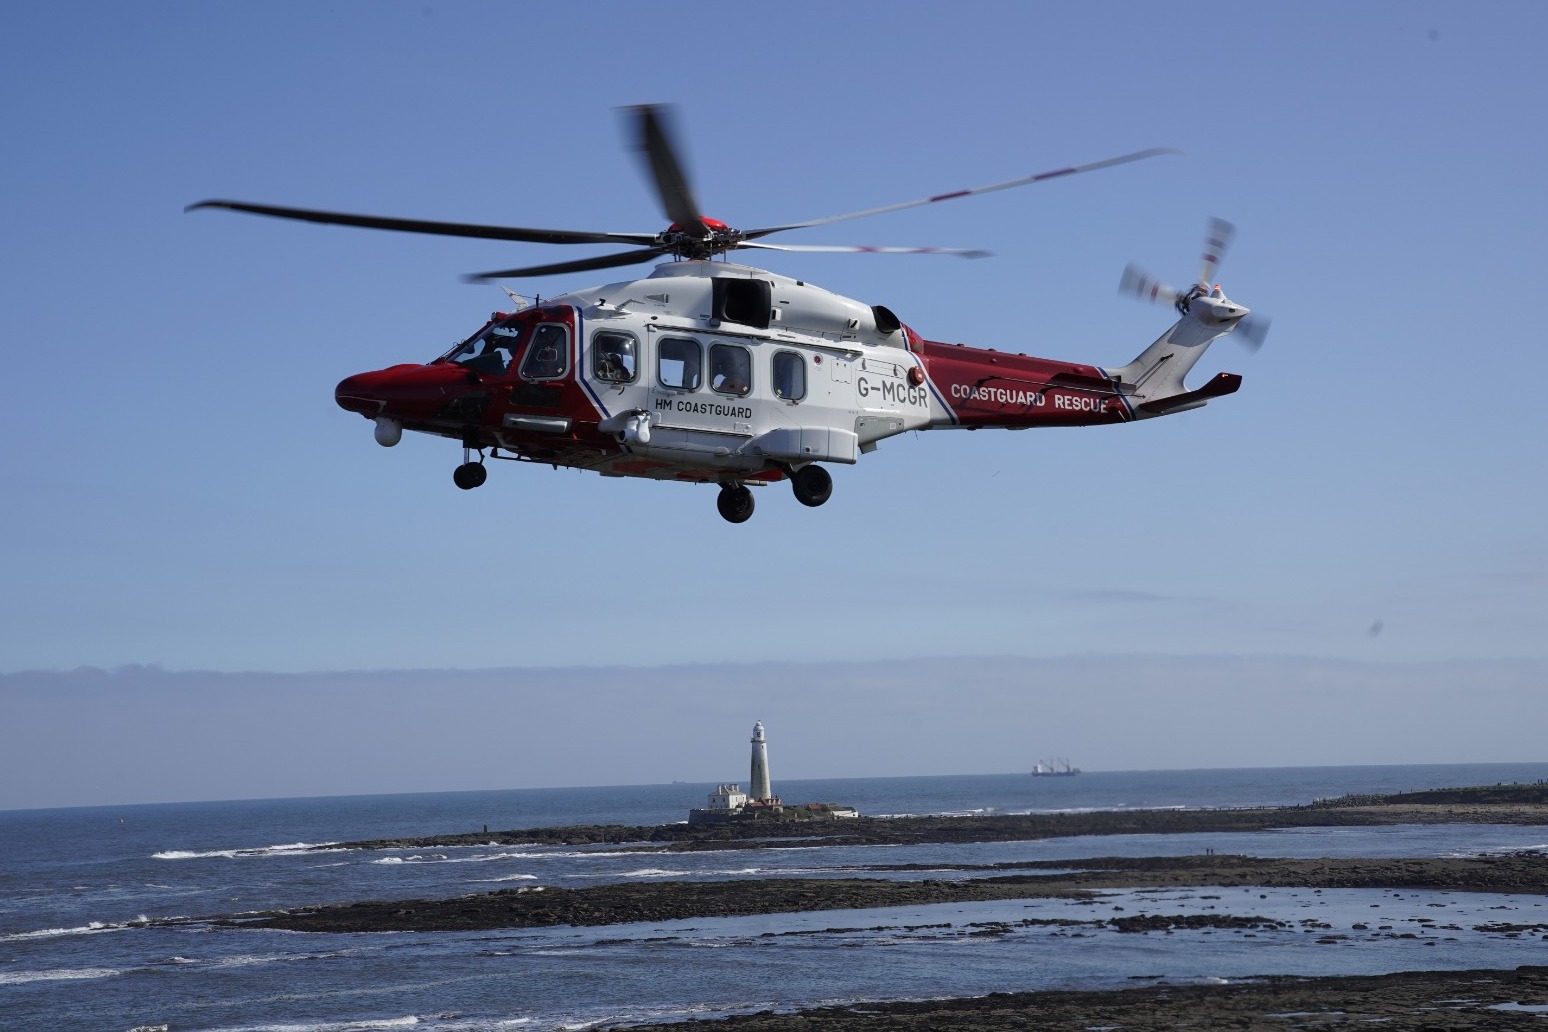 Coastguard was set up 200 years ago to combat smuggling 